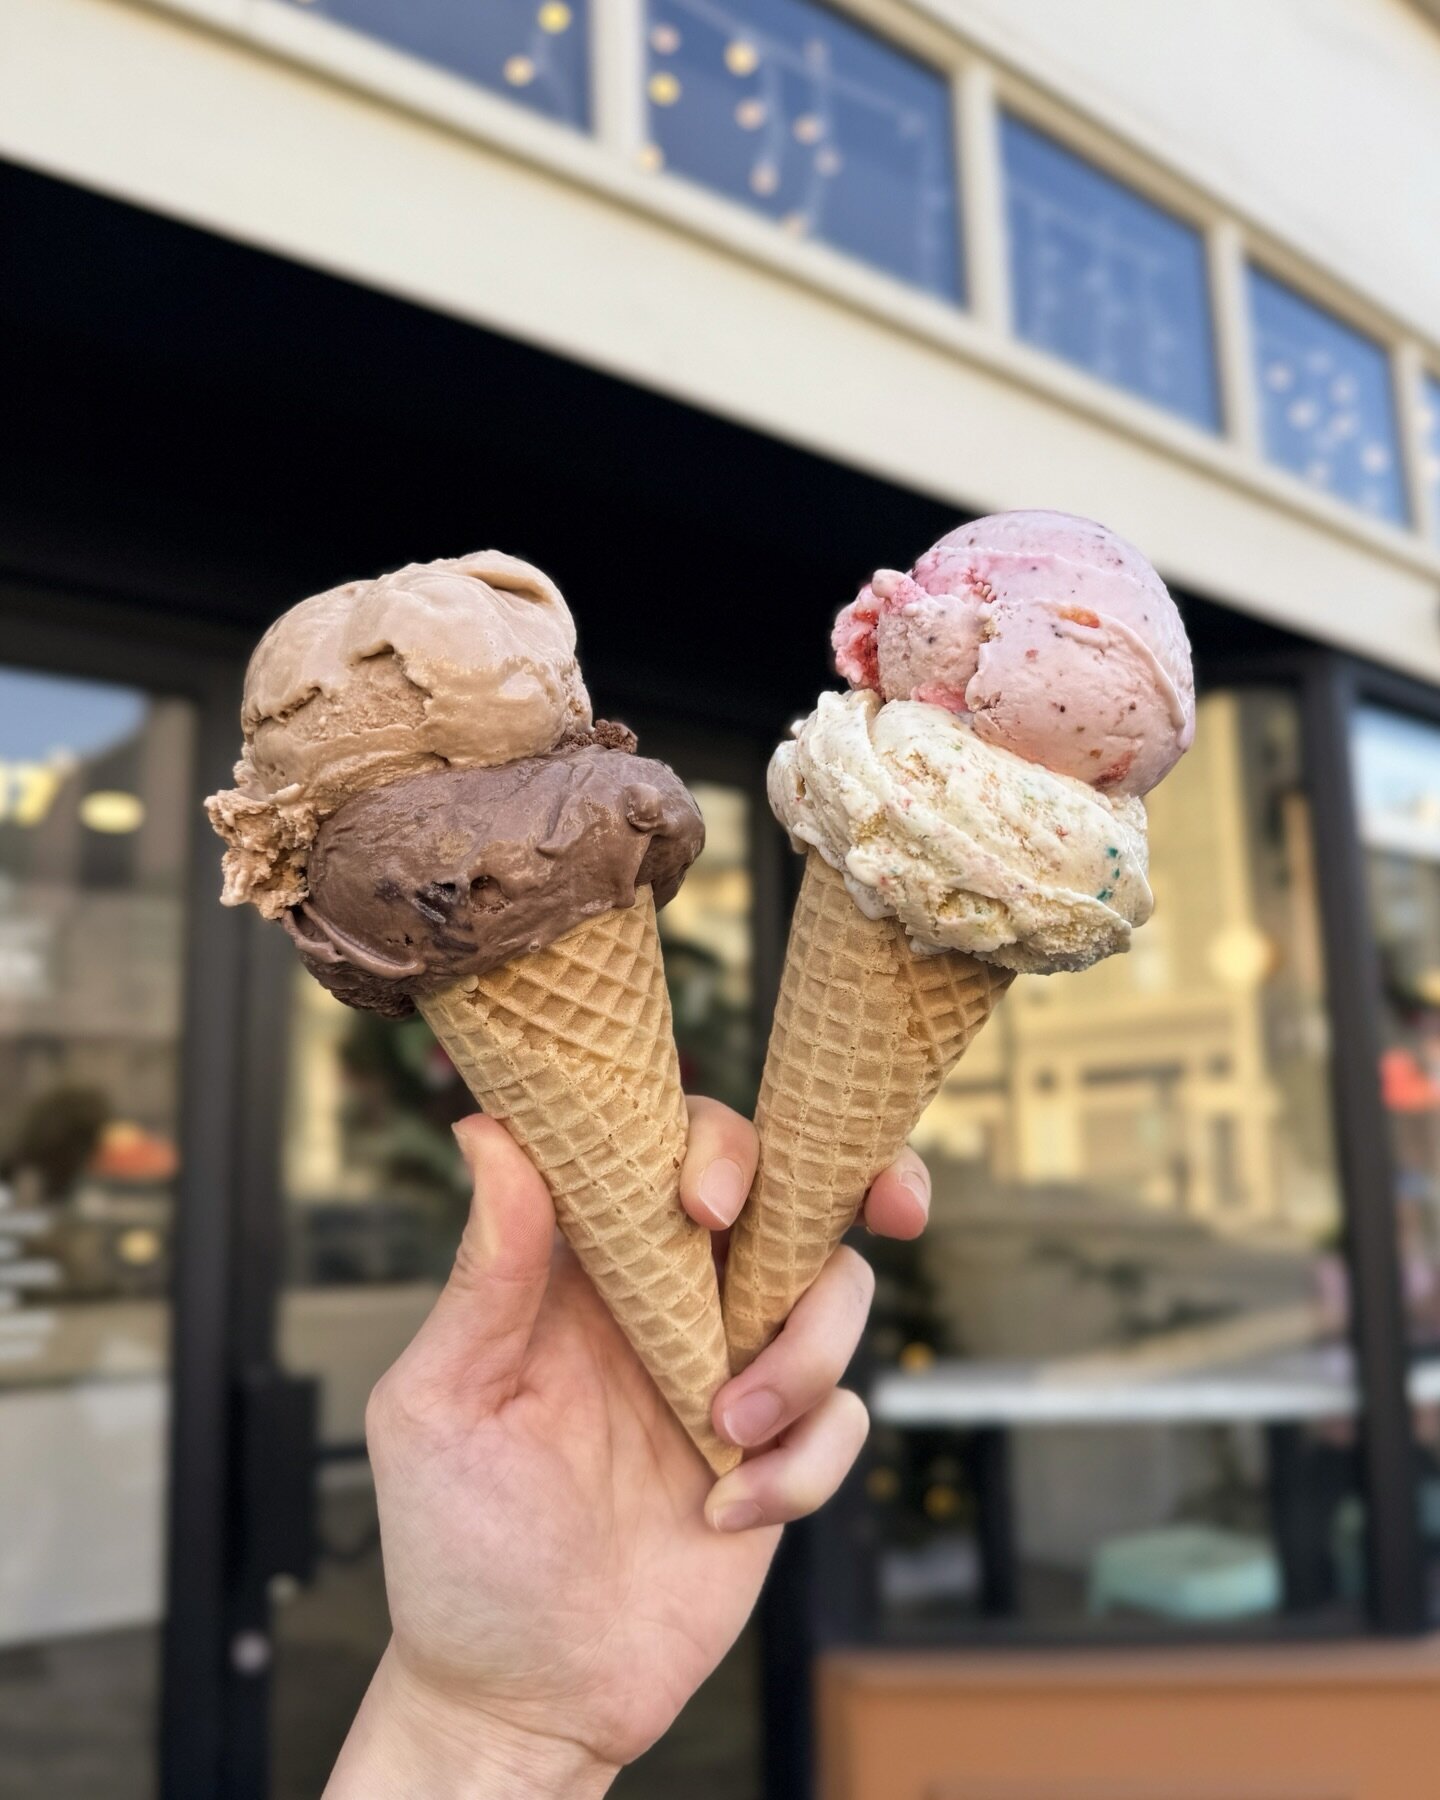 Dive into a world of flavor with our dreamy ice cream cones! 🍦✨ Indulge in Vietnamese Coffee, Chocolate Milk Malted Crunch, Strawberry Poptart, and Fruity Pebbles. Which scoop steals your heart? 💖
.
.
.
.
.
.
.
.
.
.
.
.
.
.
#icecream #dessert #oak